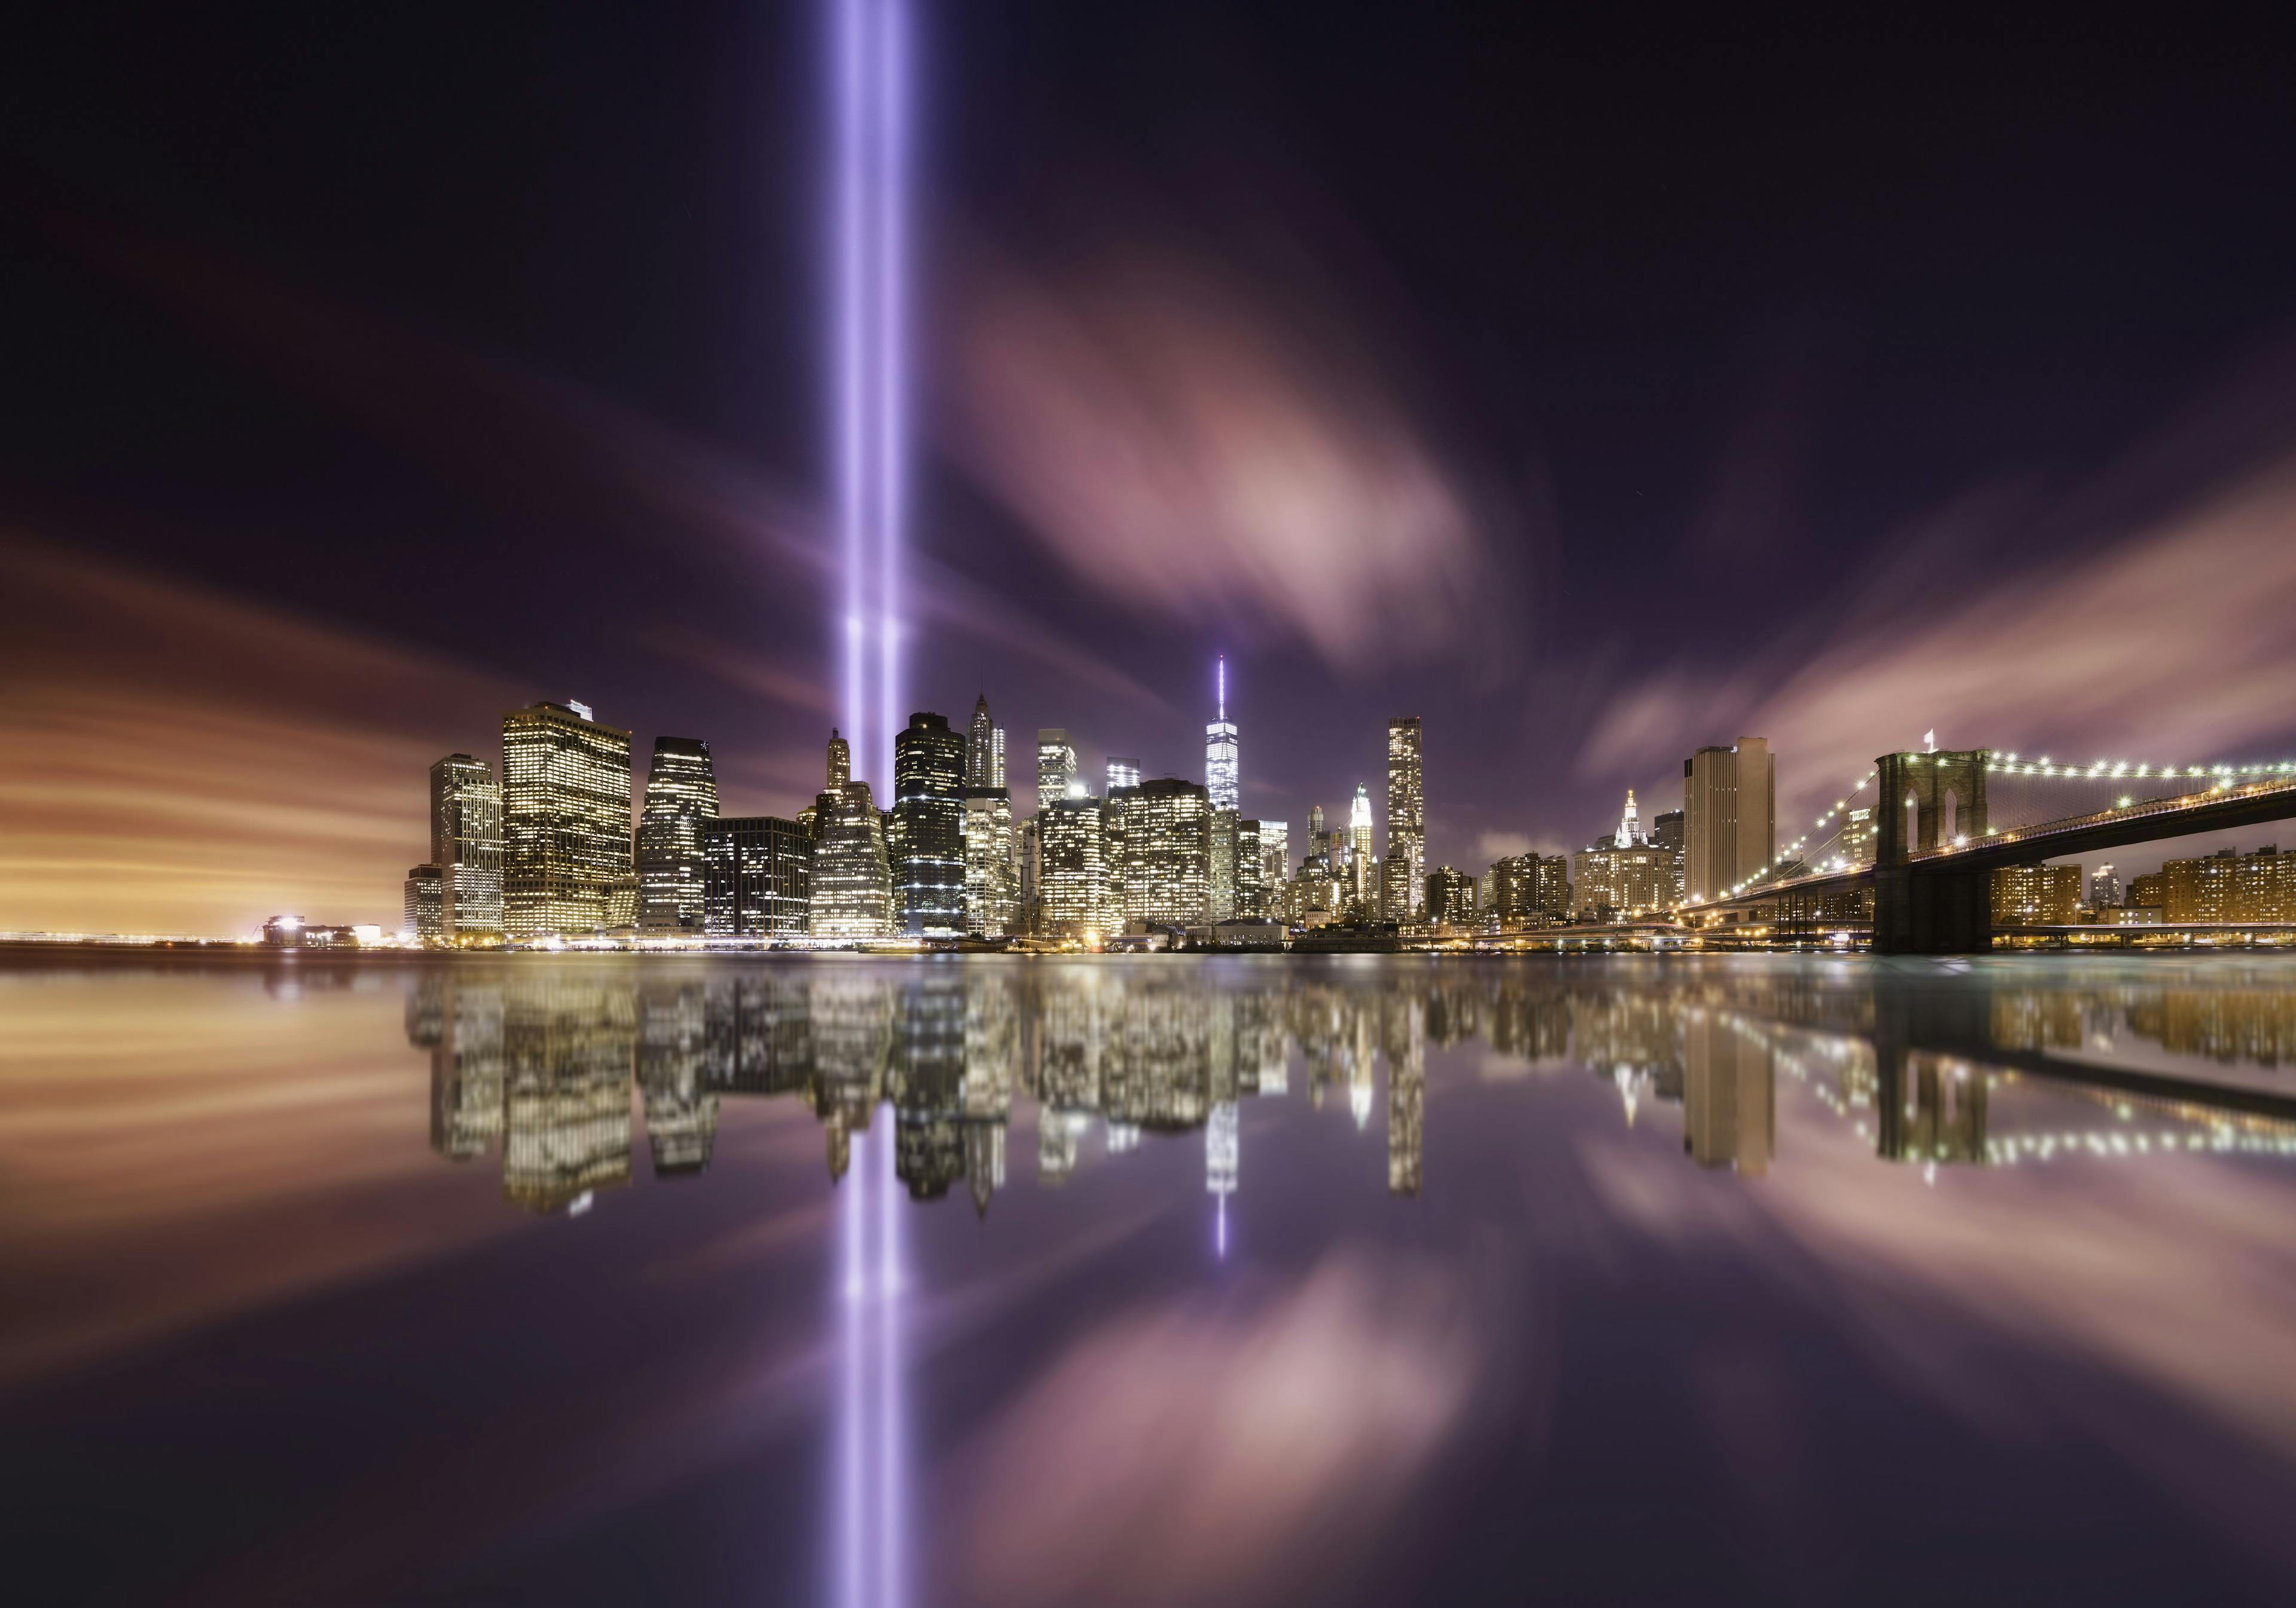 A Call for Your Reflections on 9/11